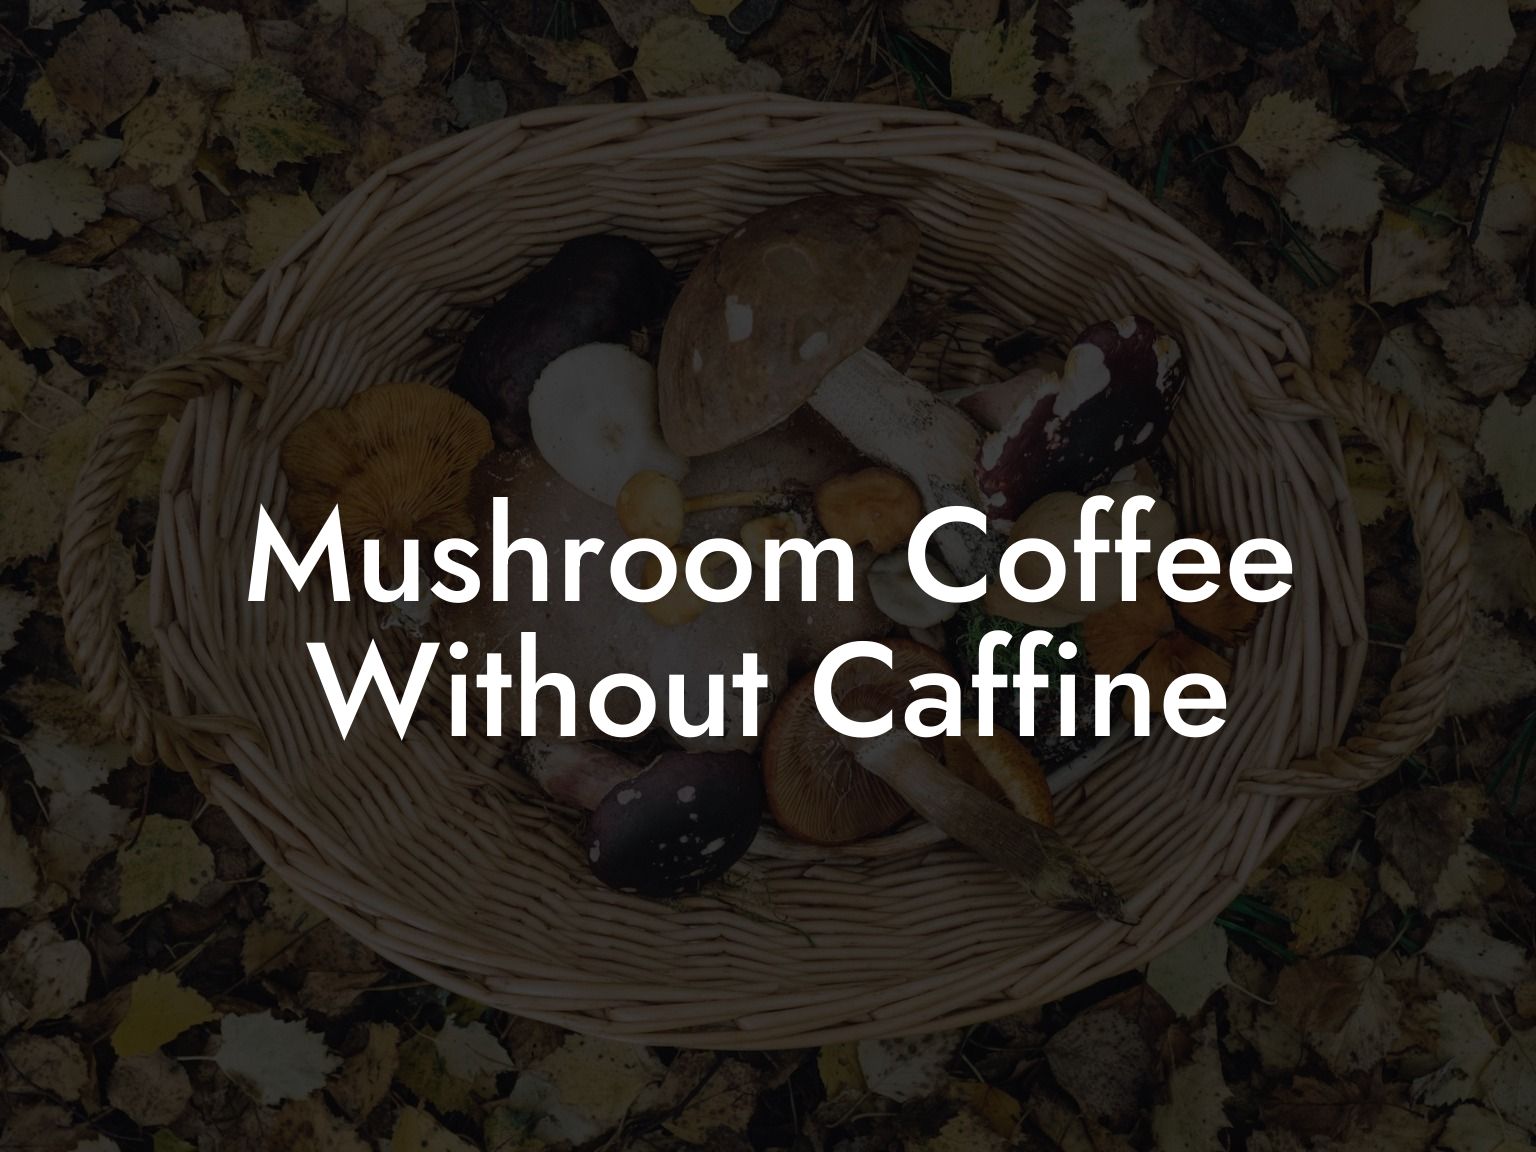 Mushroom Coffee Without Caffine